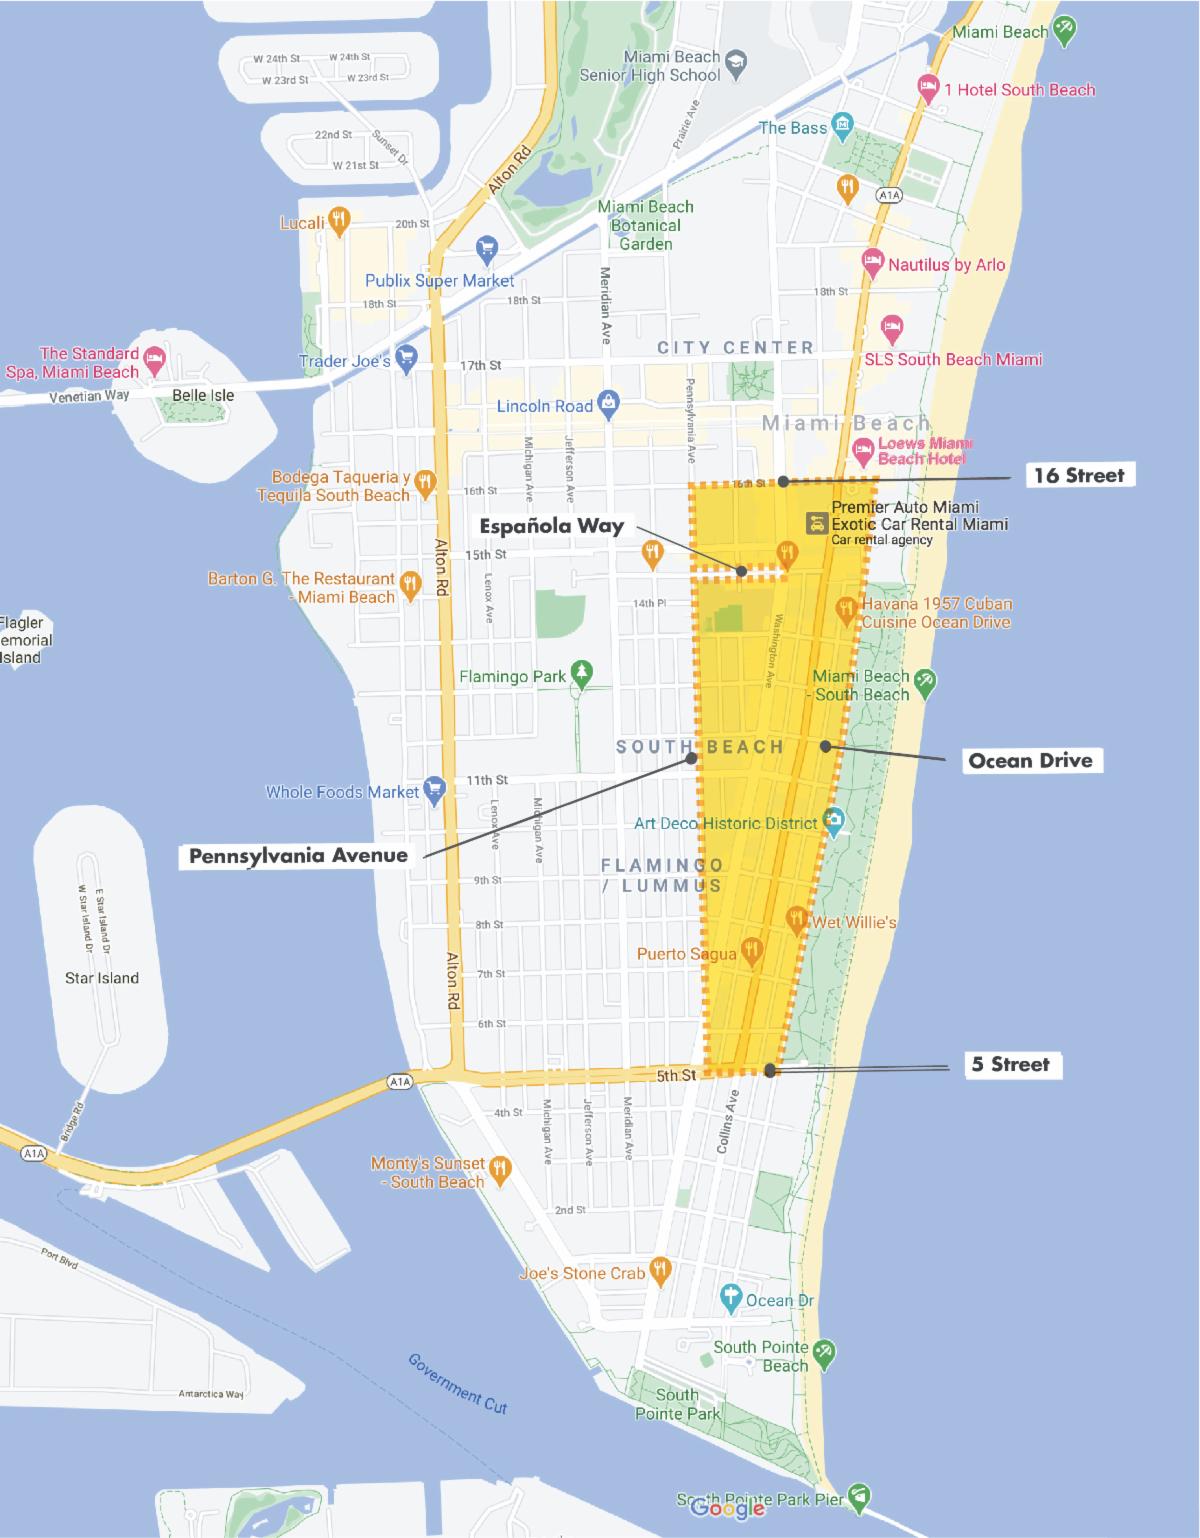 City of Miami Beach Updates State of Emergency Relating to the High